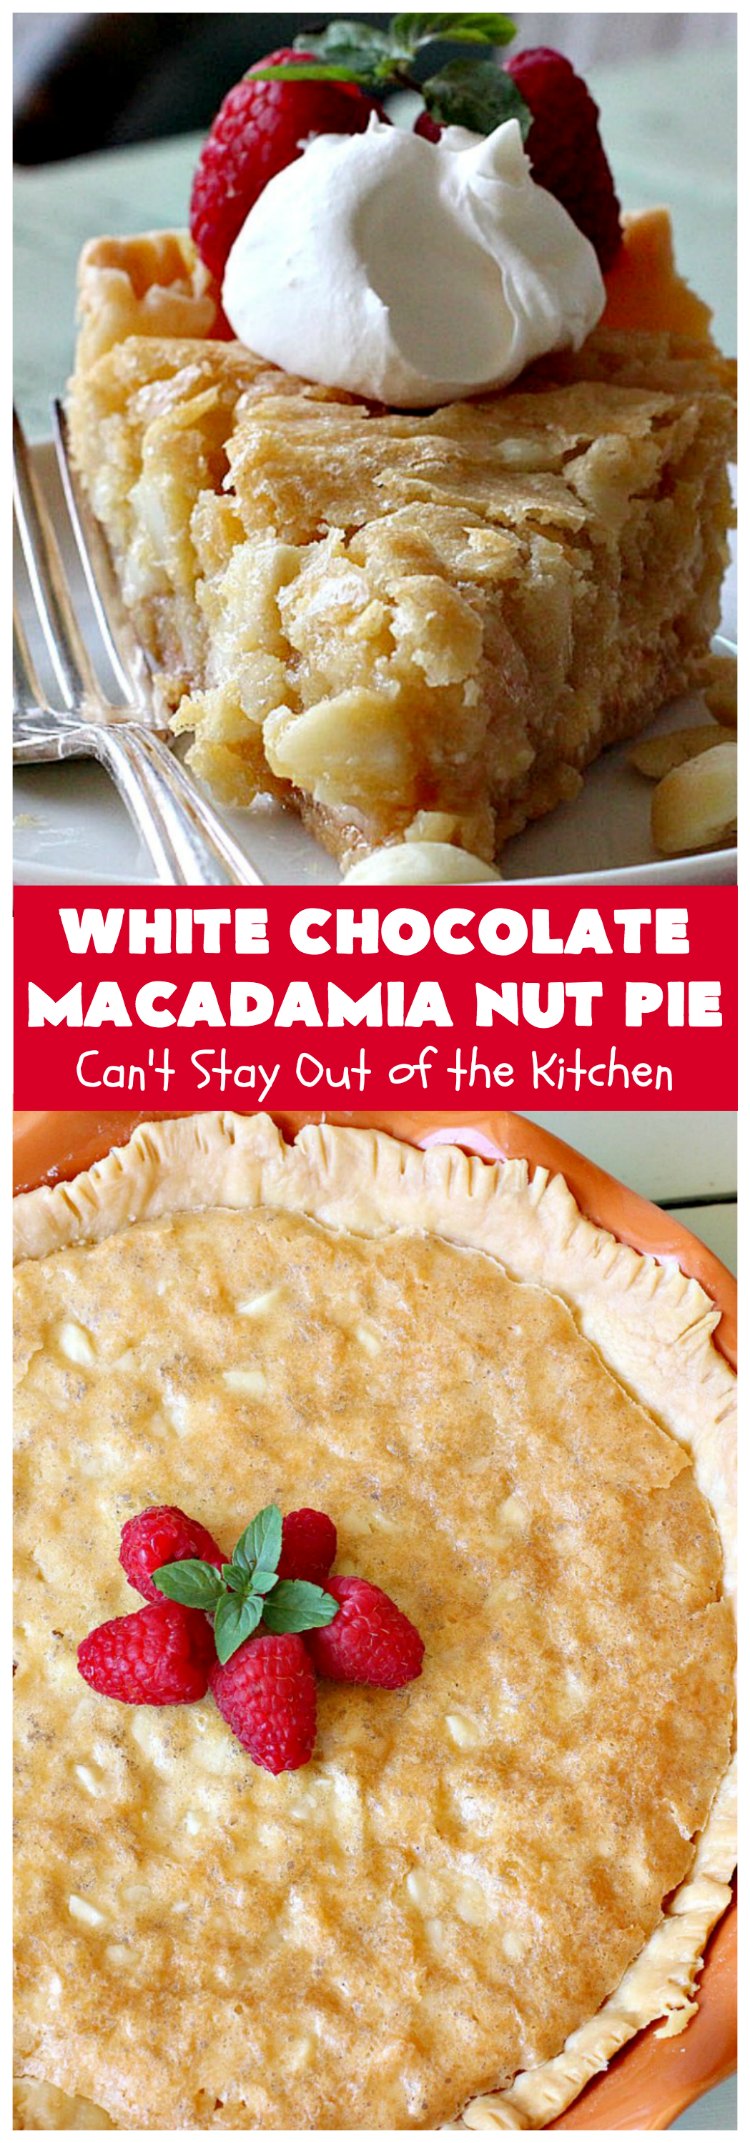 White Chocolate Macadamia Nut Pie | Can't Stay Out of the Kitchen